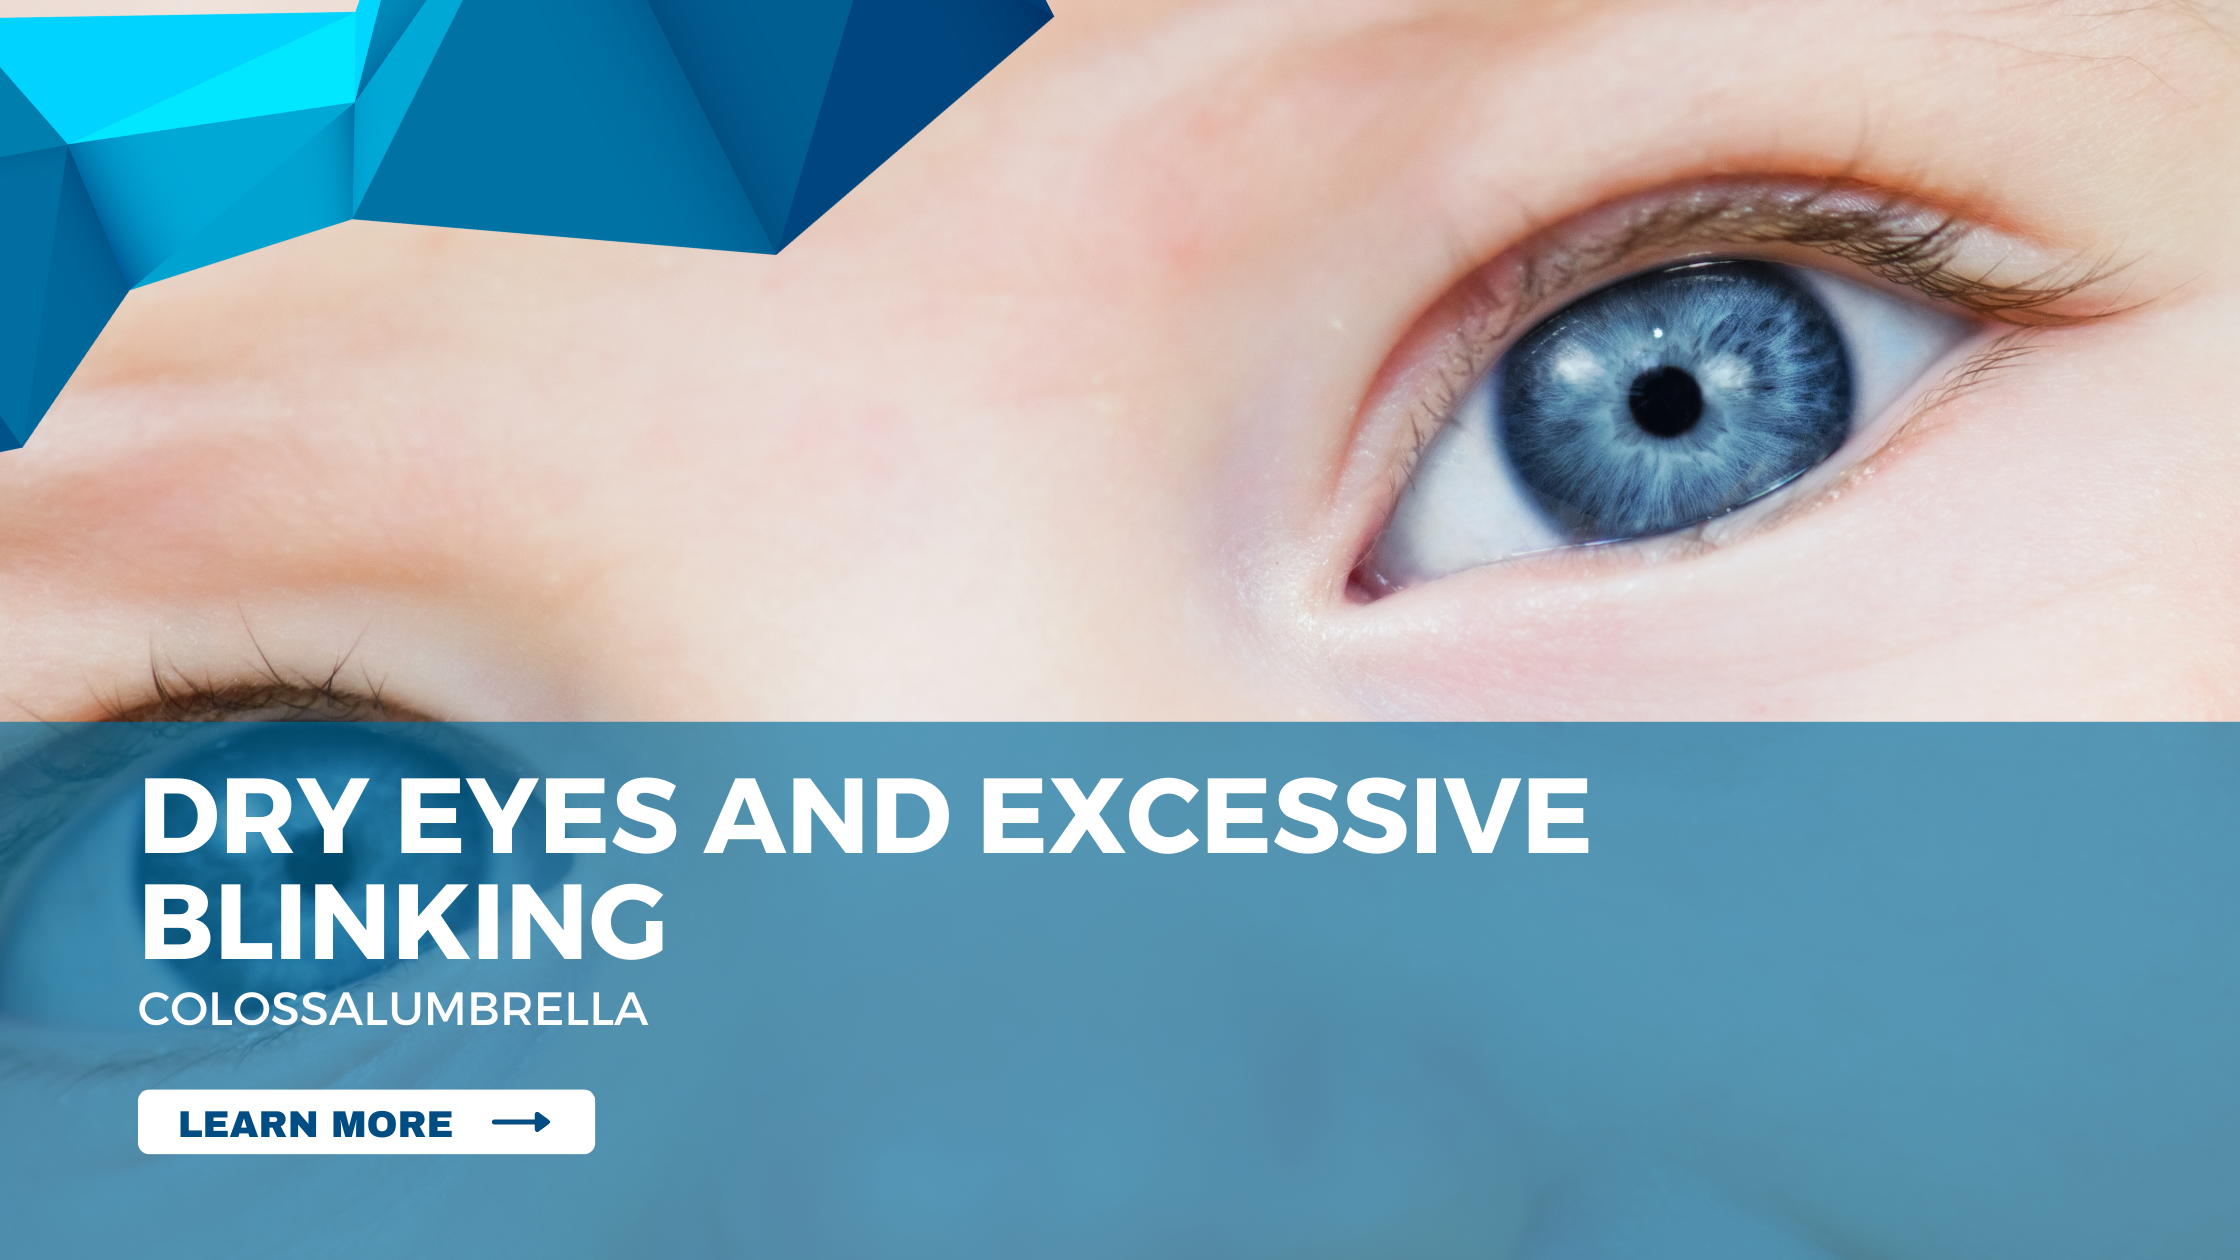 Child dry eyes blinking – Symptoms and Treatments